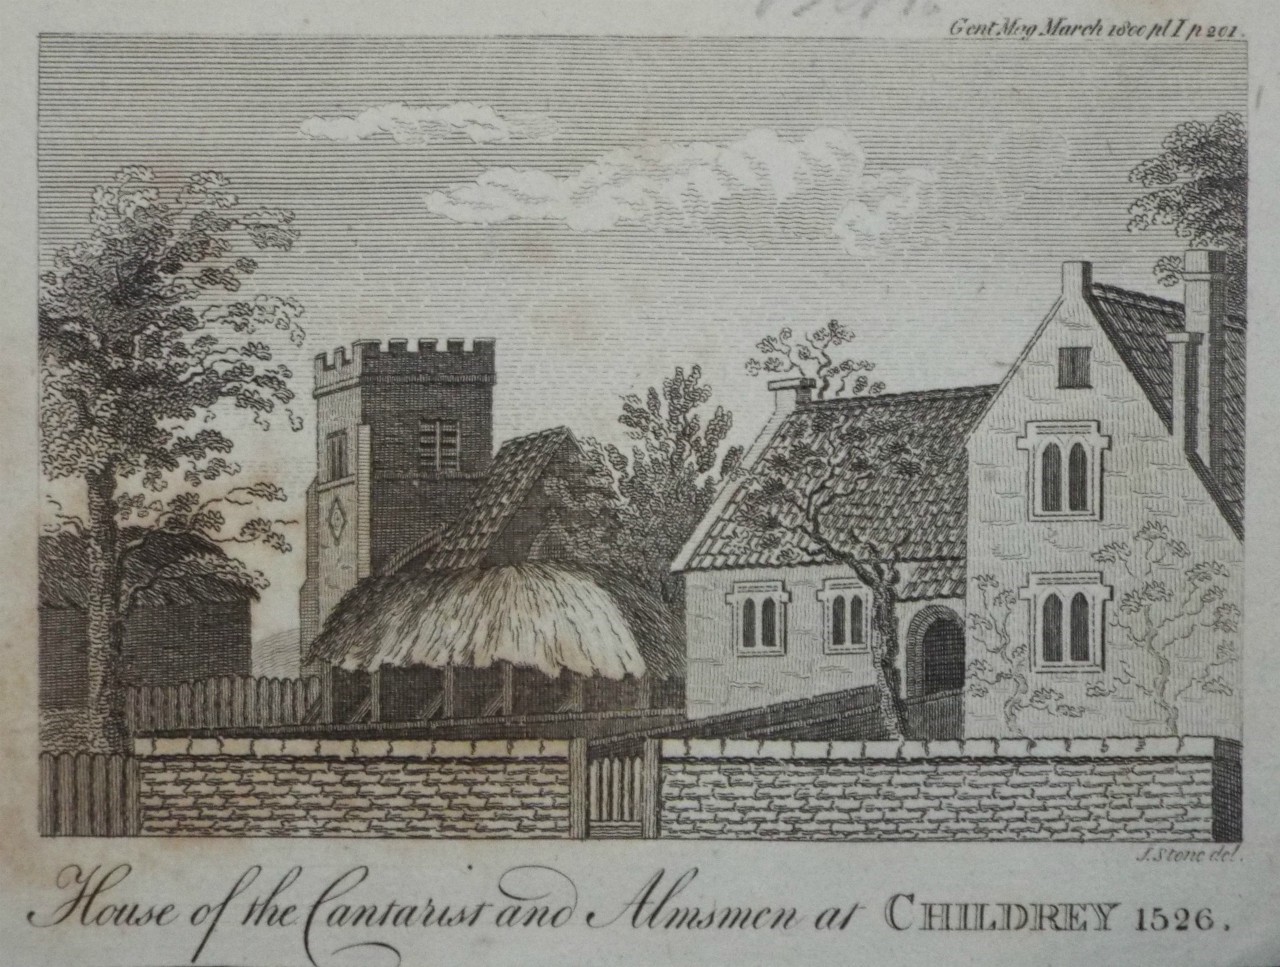 Print - House of the Cantarist and Almsmen at Childrey 1526.